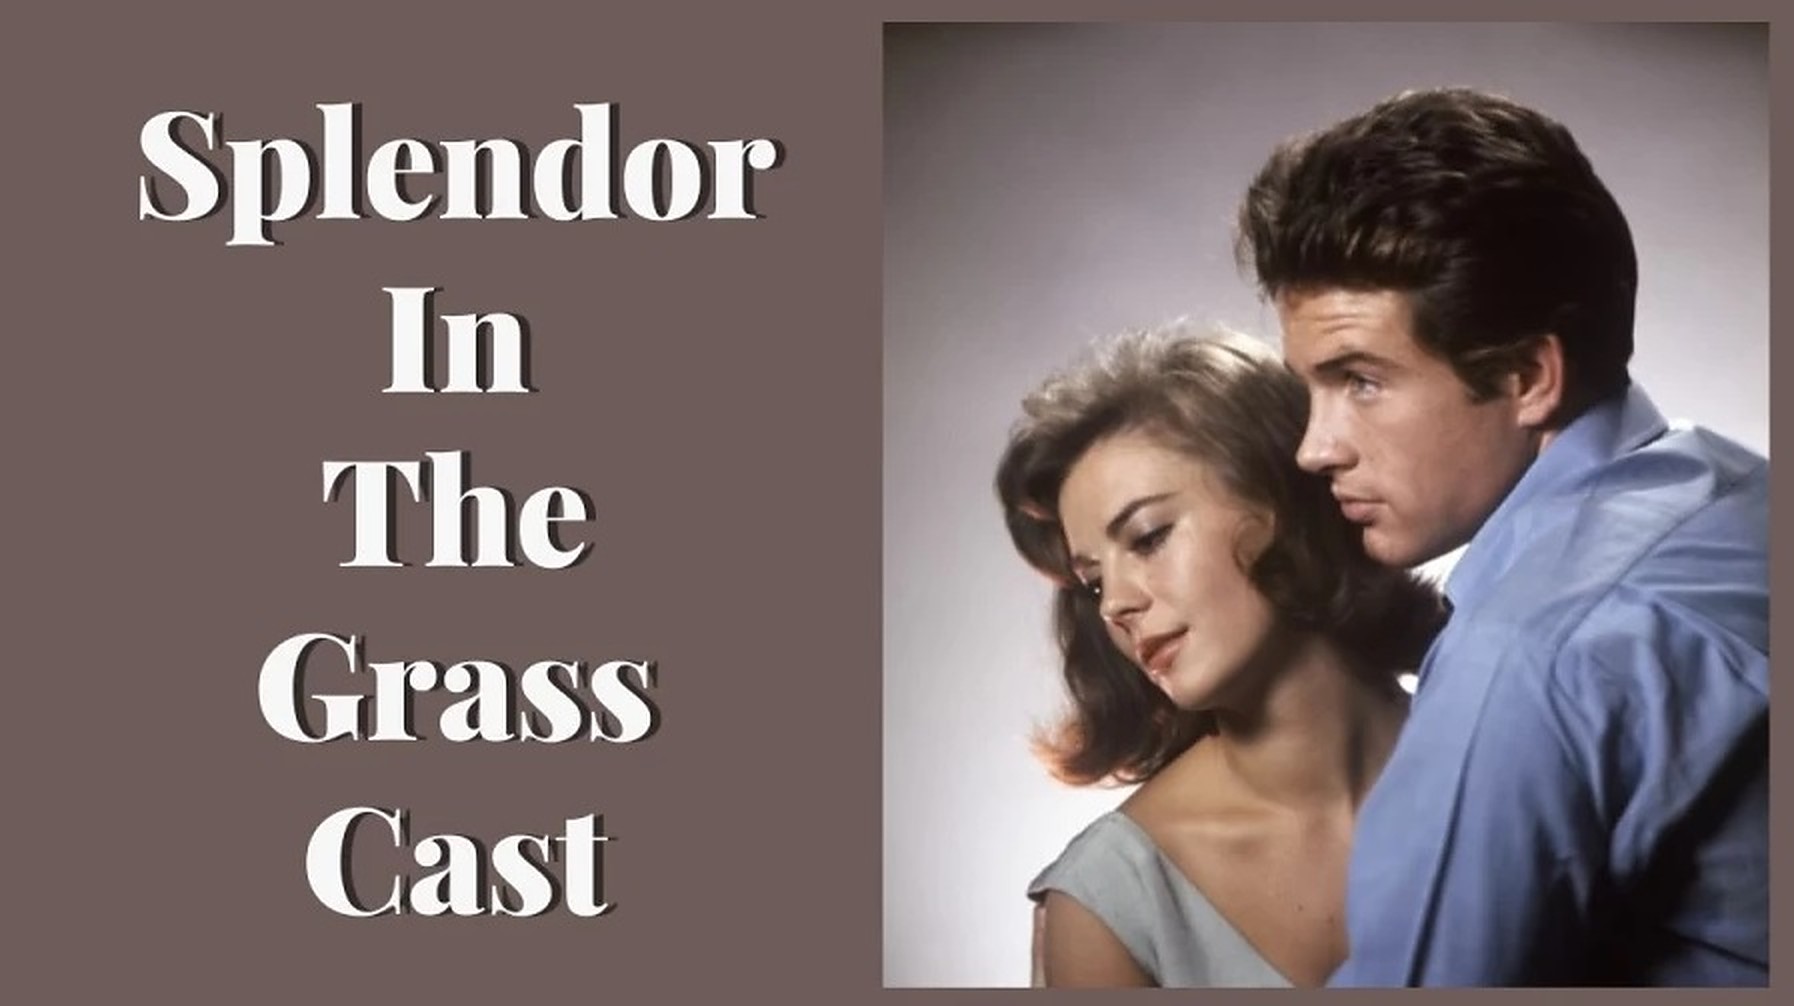 39-facts-about-the-movie-splendor-in-the-grass